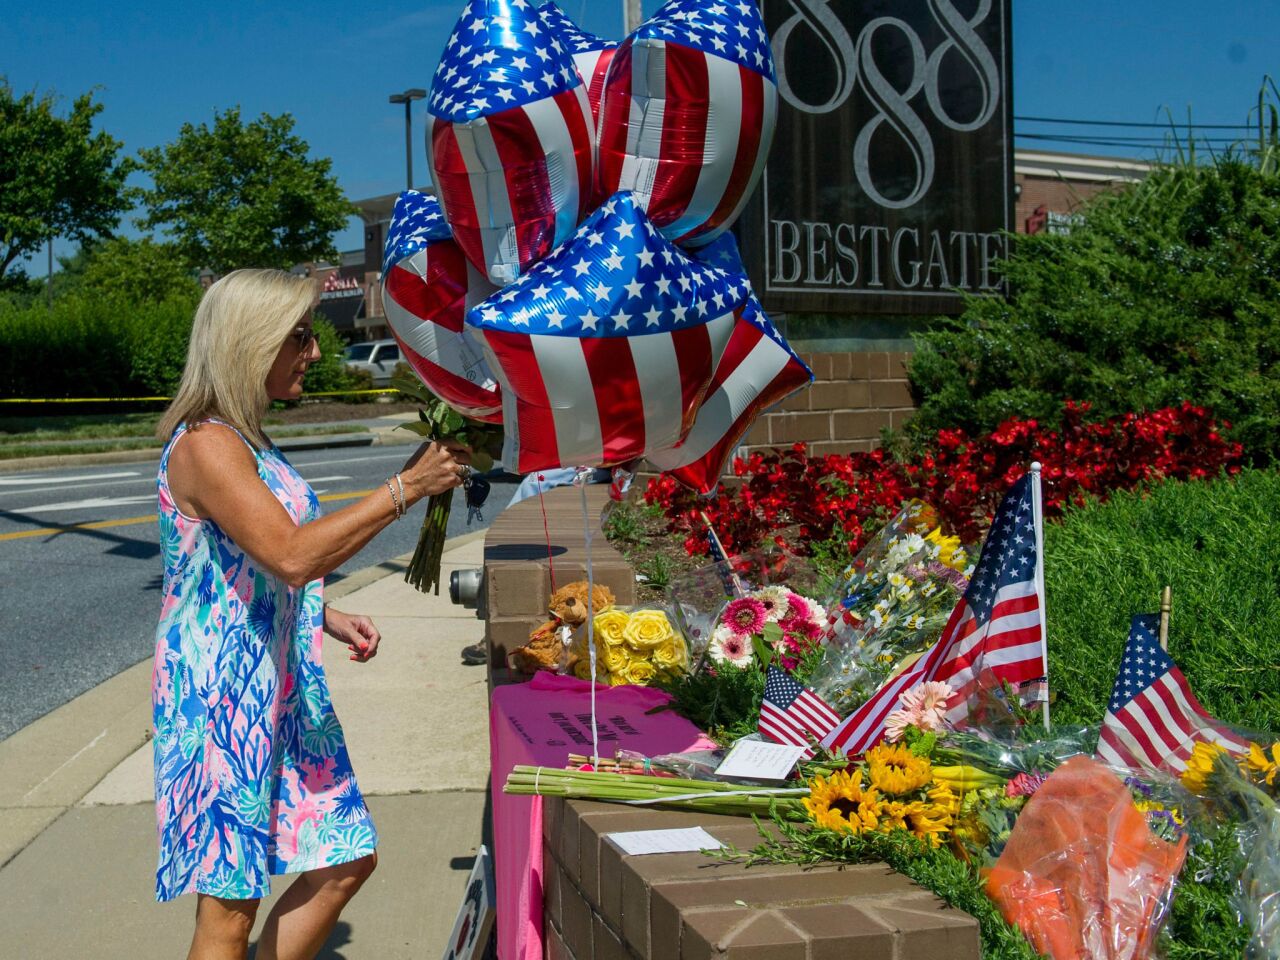 A woman delivers flowers at a memorial to shooting victims at the Capital newspaper in Annapolis, Md.